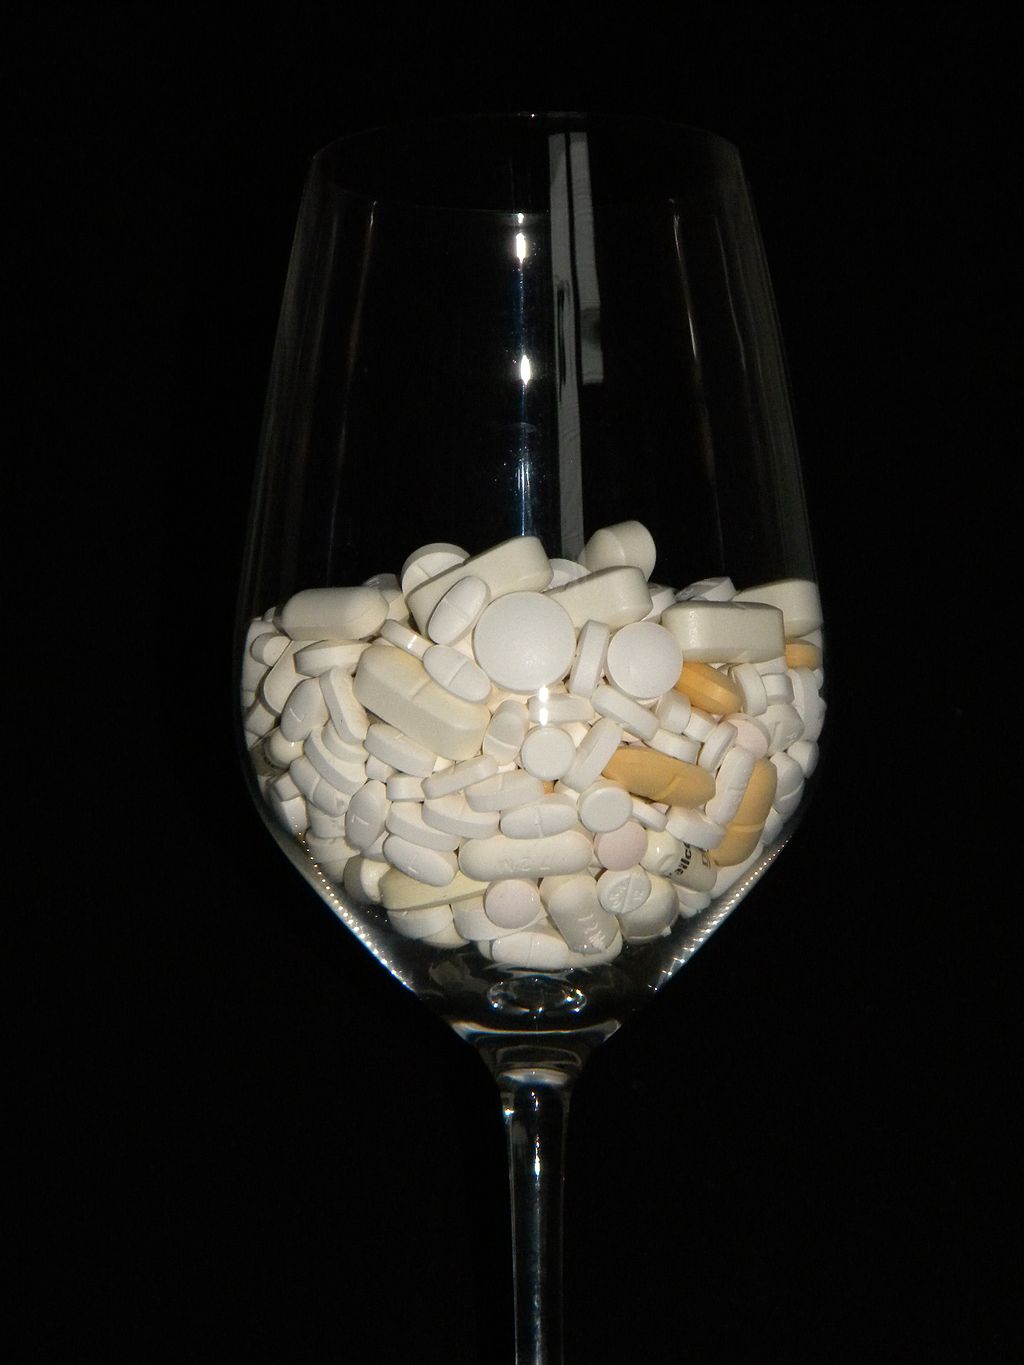 Medicine cocktail tablets and pills in glass